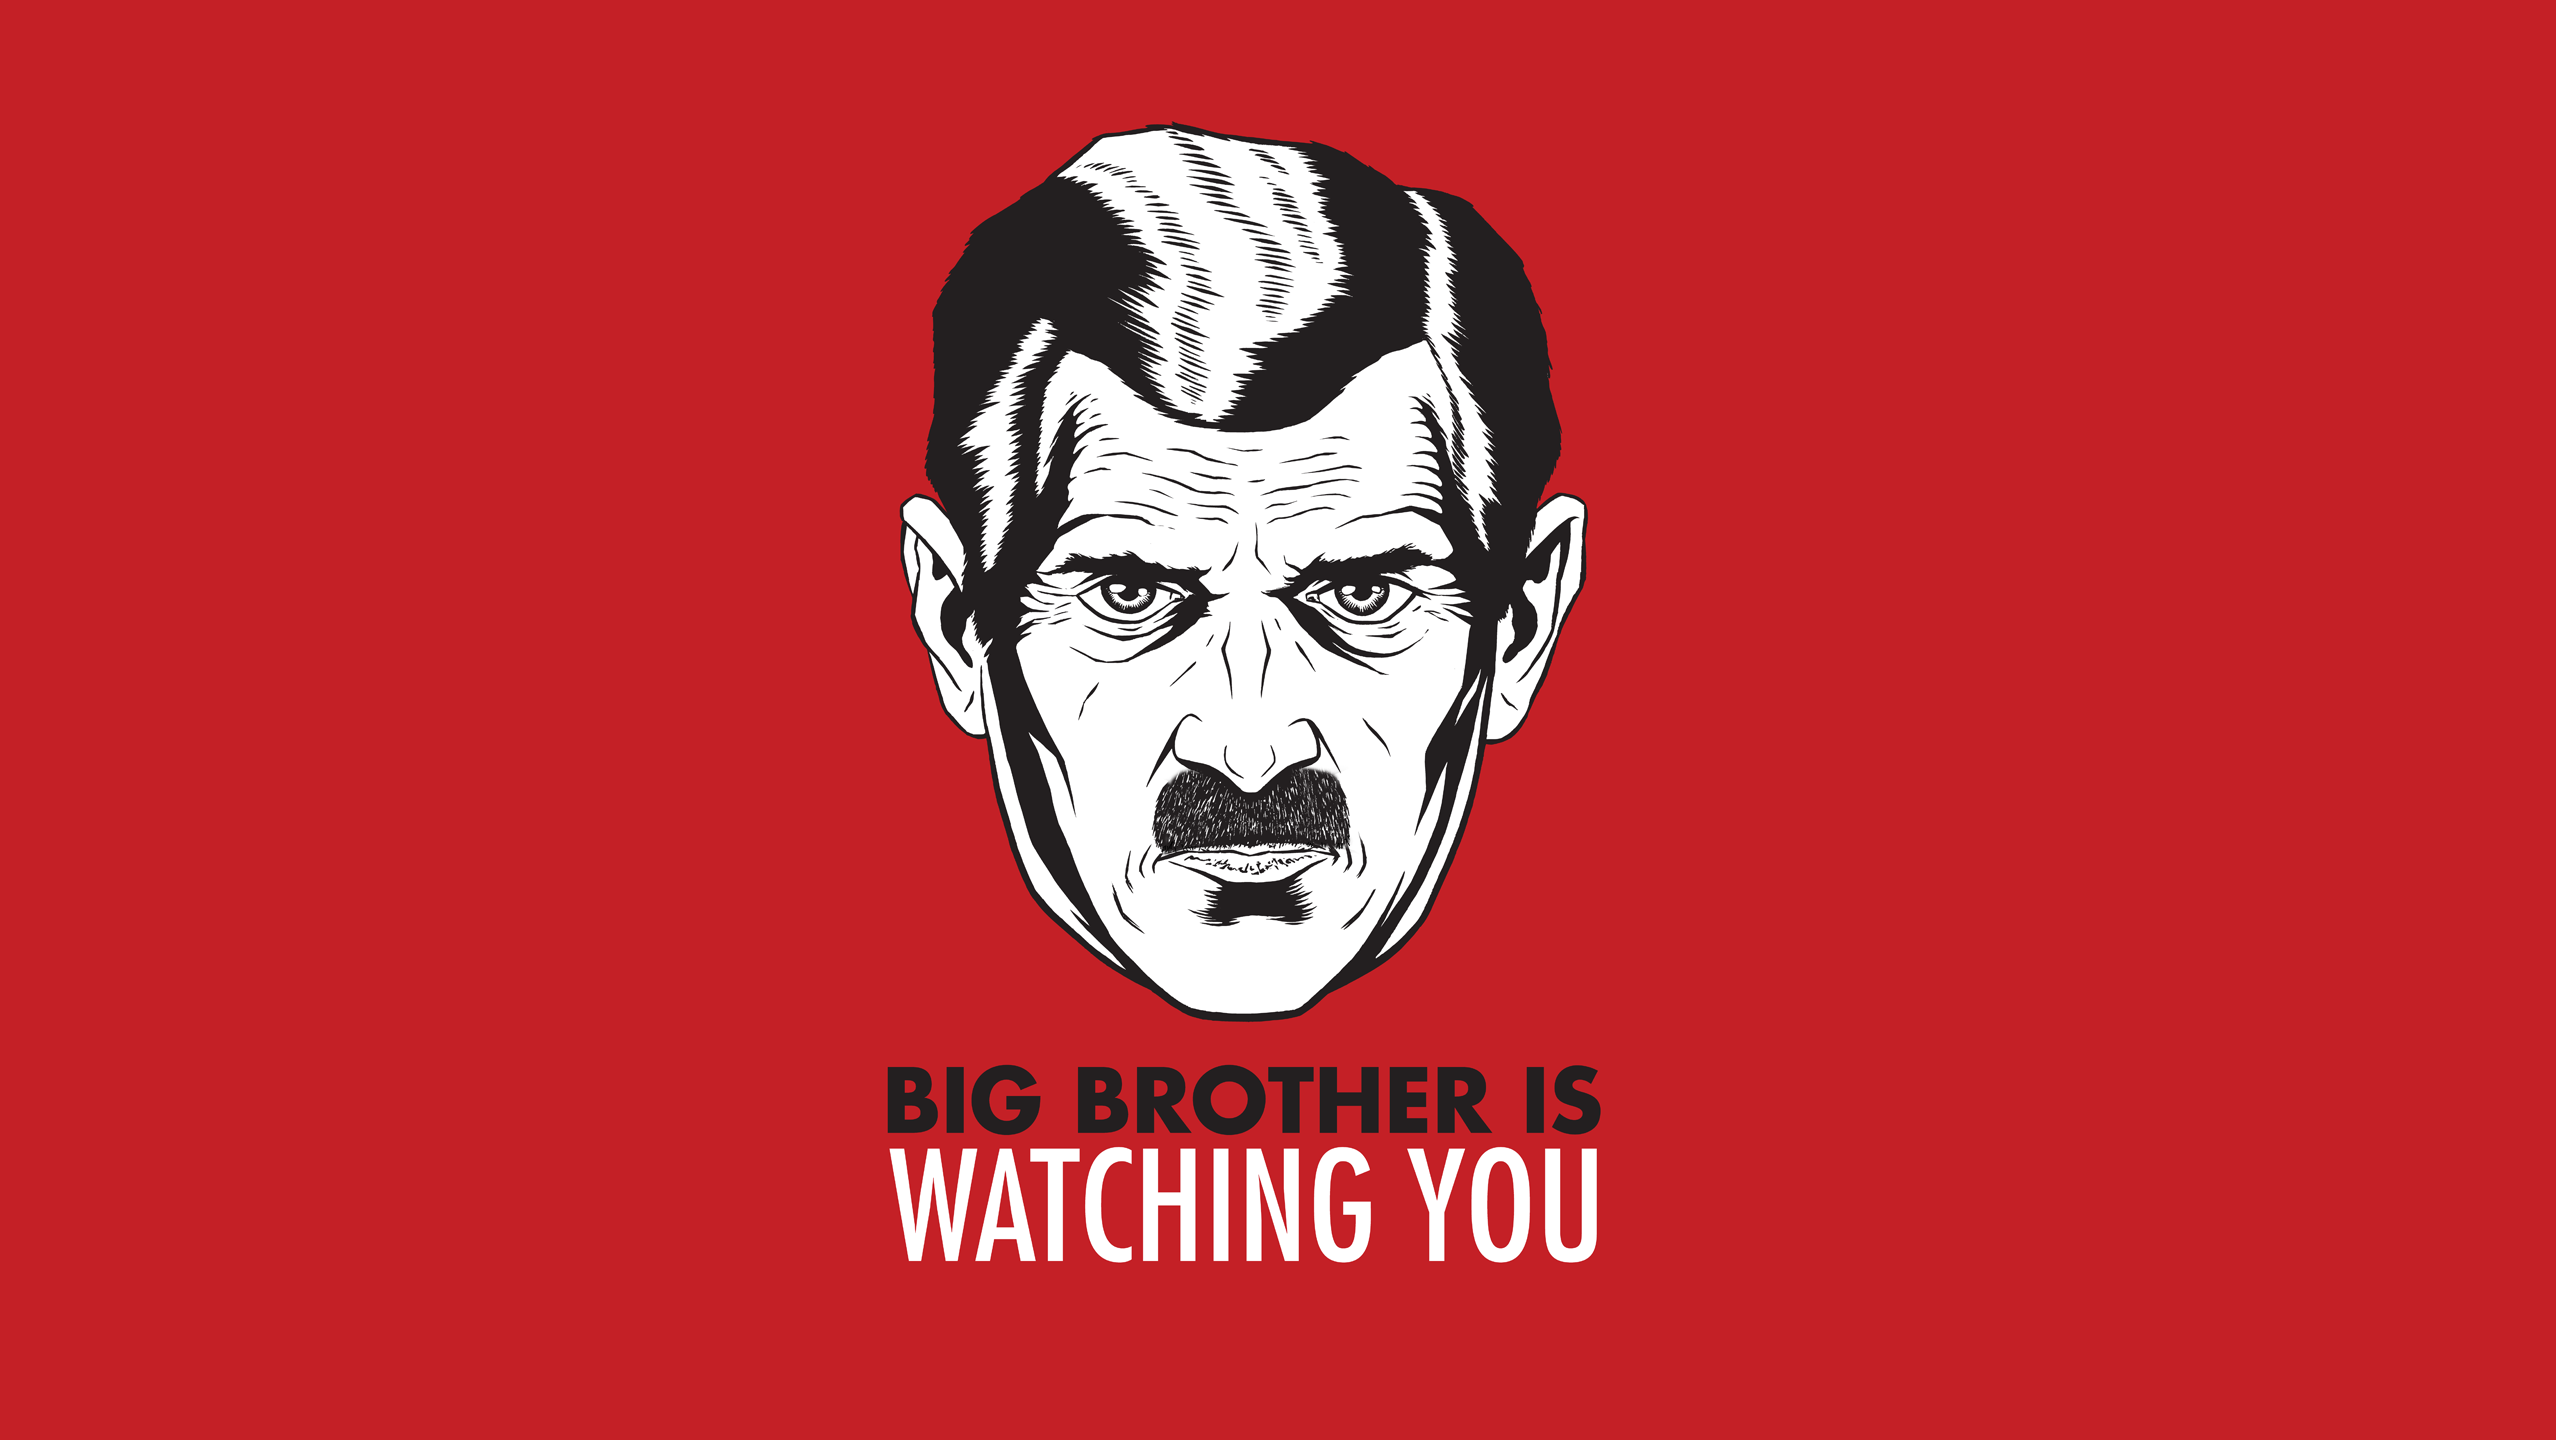 General 2556x1440 red background face big brother moustache red typography dystopian 1984 George Orwell text simple background digital art